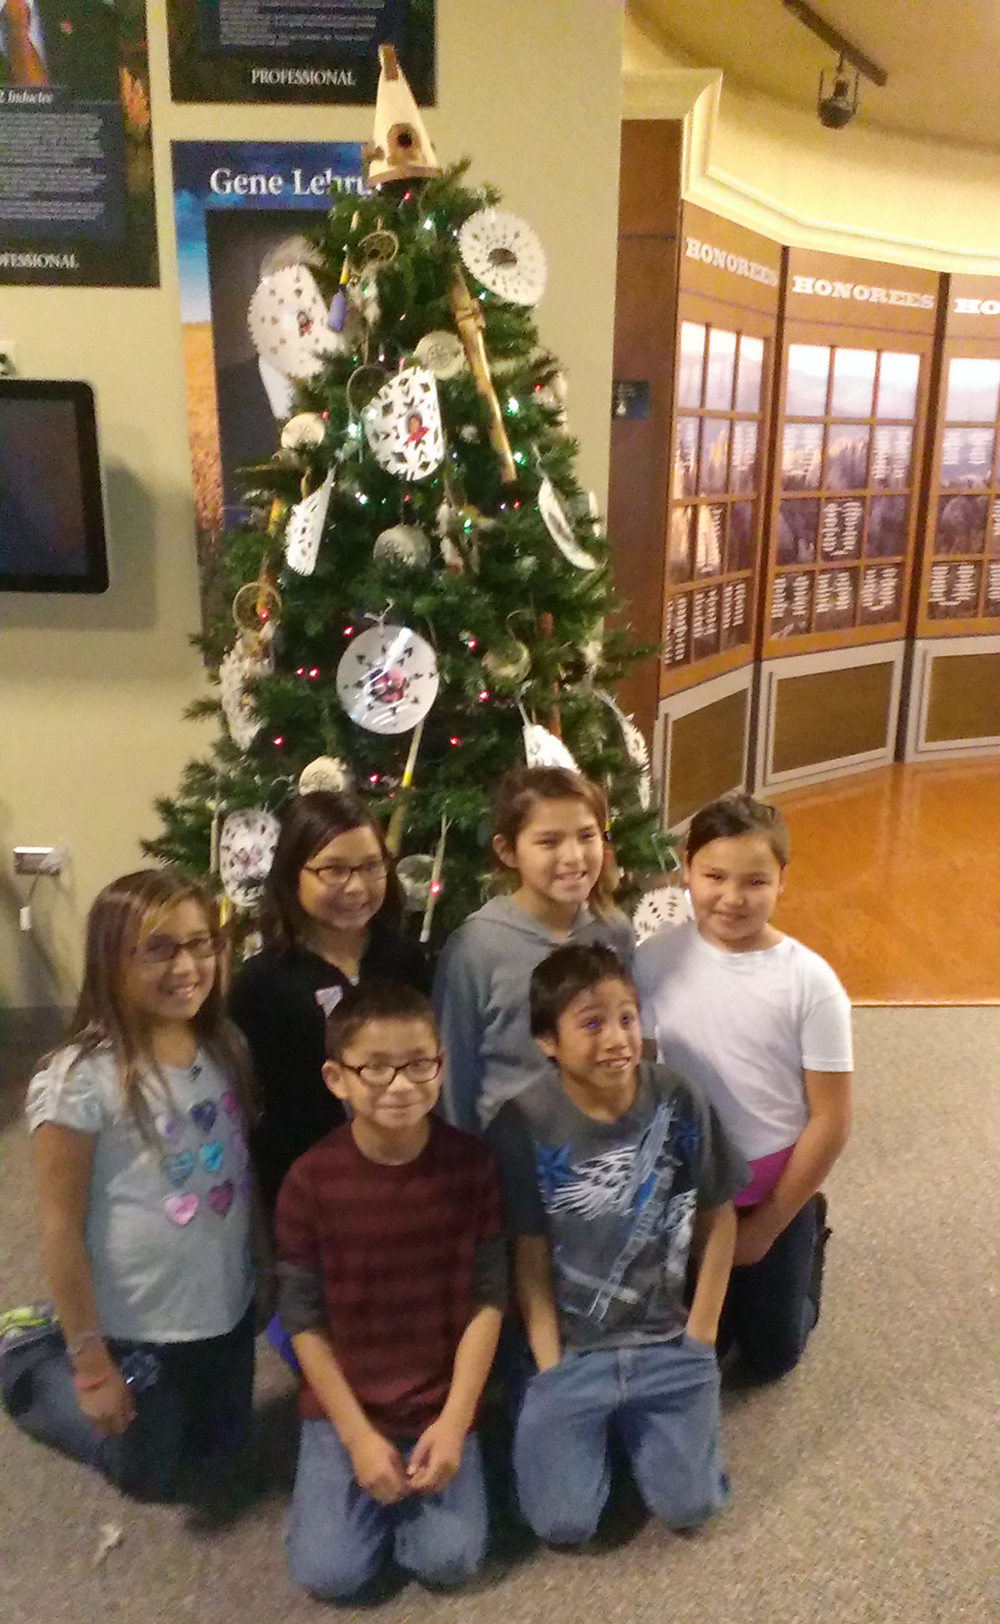 St. Joseph’s tree at the South Dakota Hall of Fame was decorated by younger Lakota students.